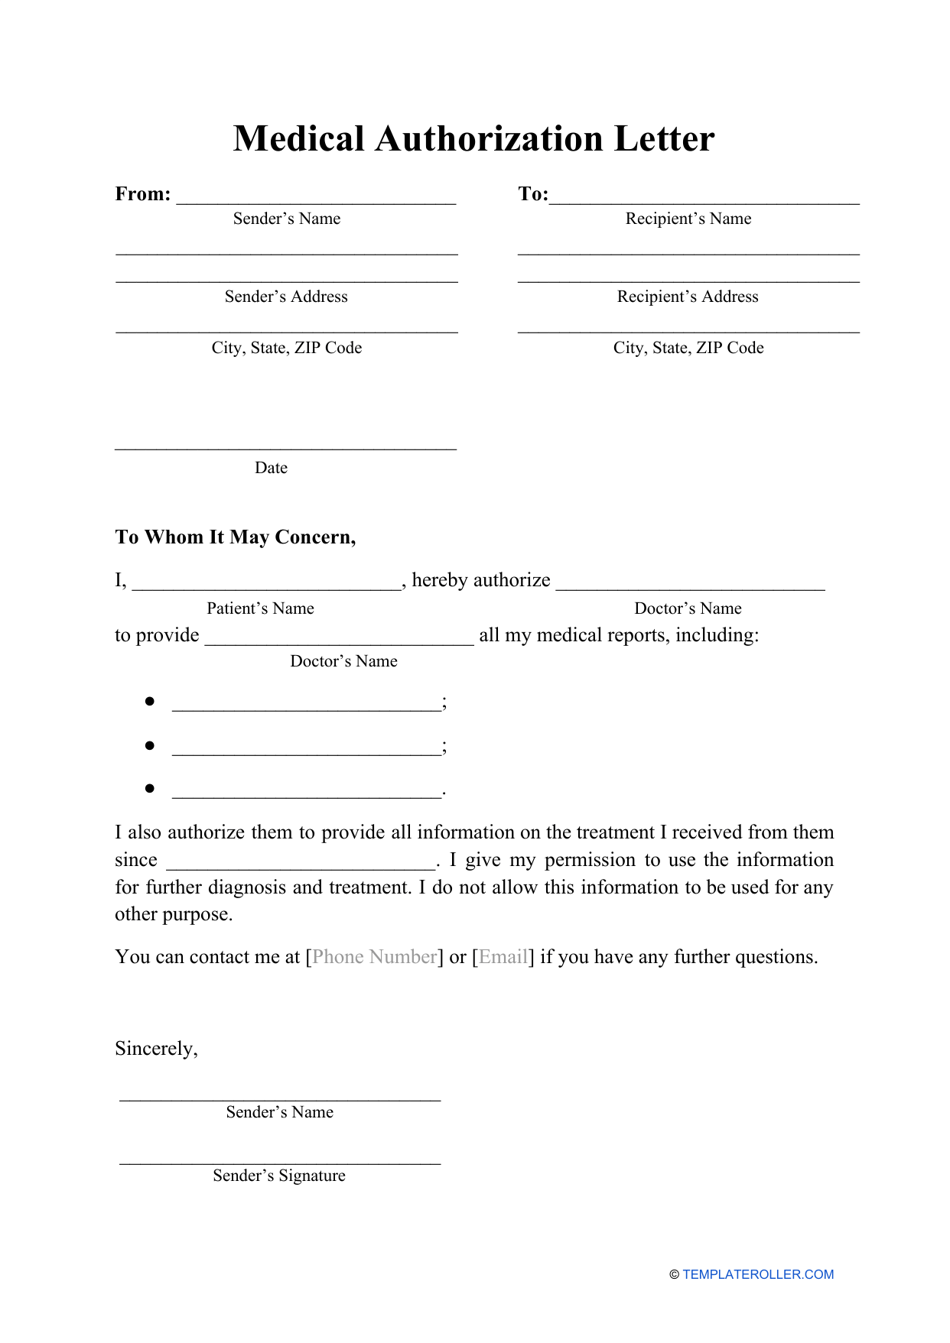 medical-permission-letter-template